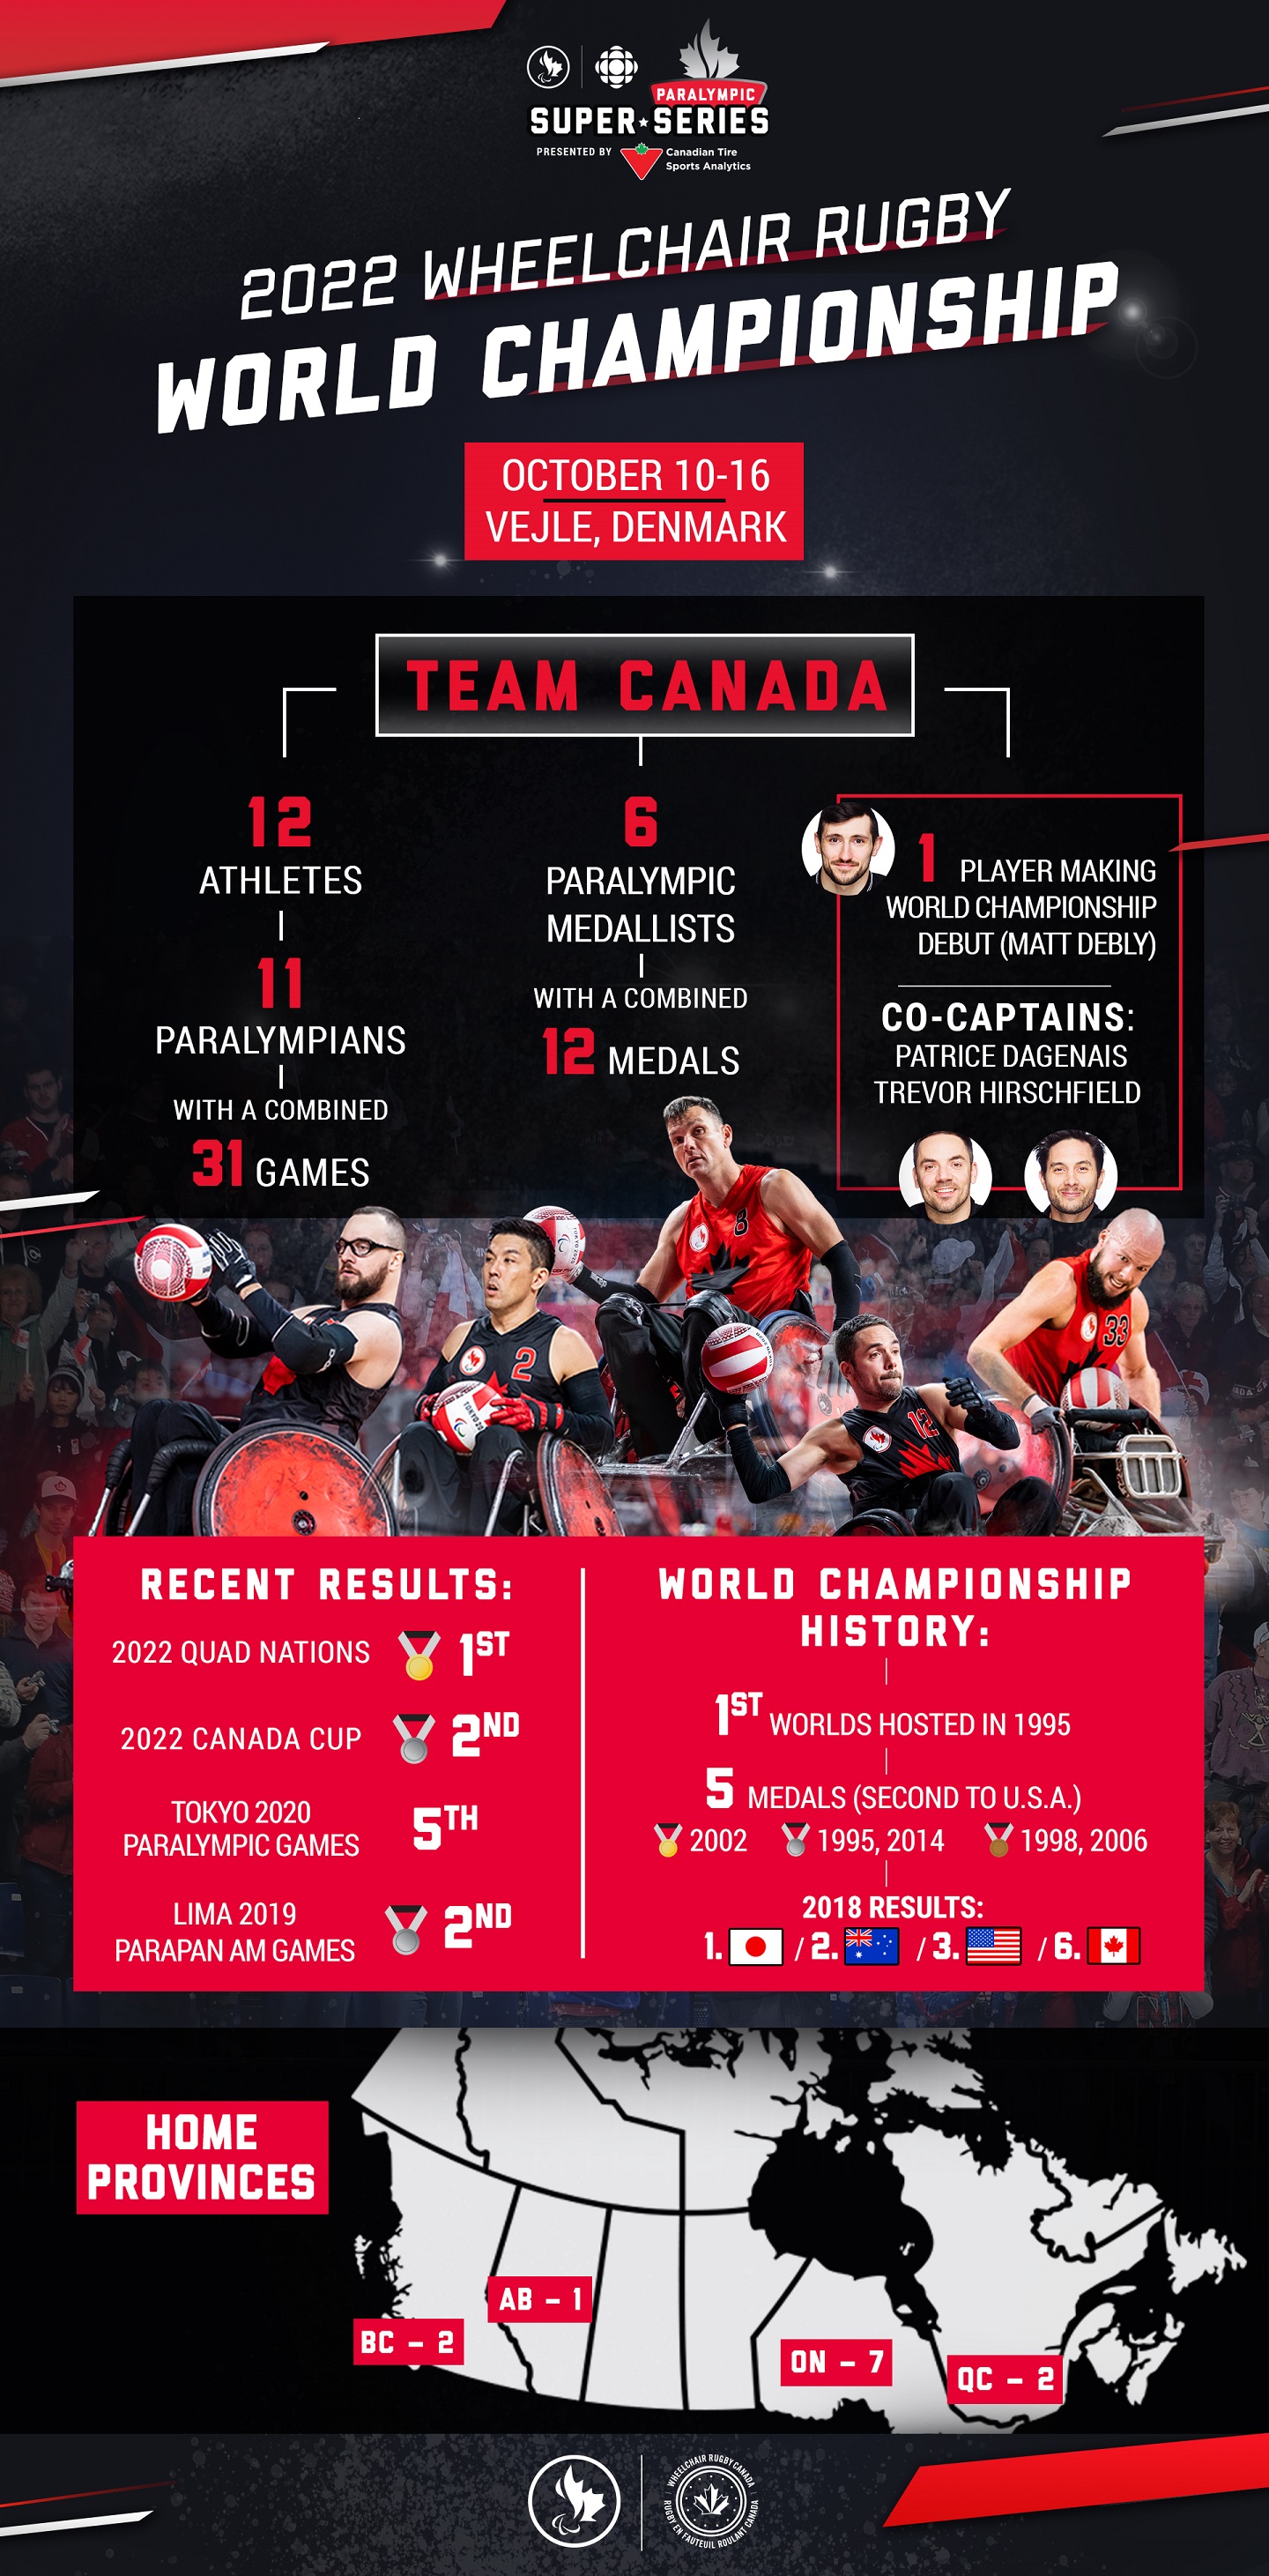 An infographic showing stats about the 2022 Wheelchair Rugby World Championship team